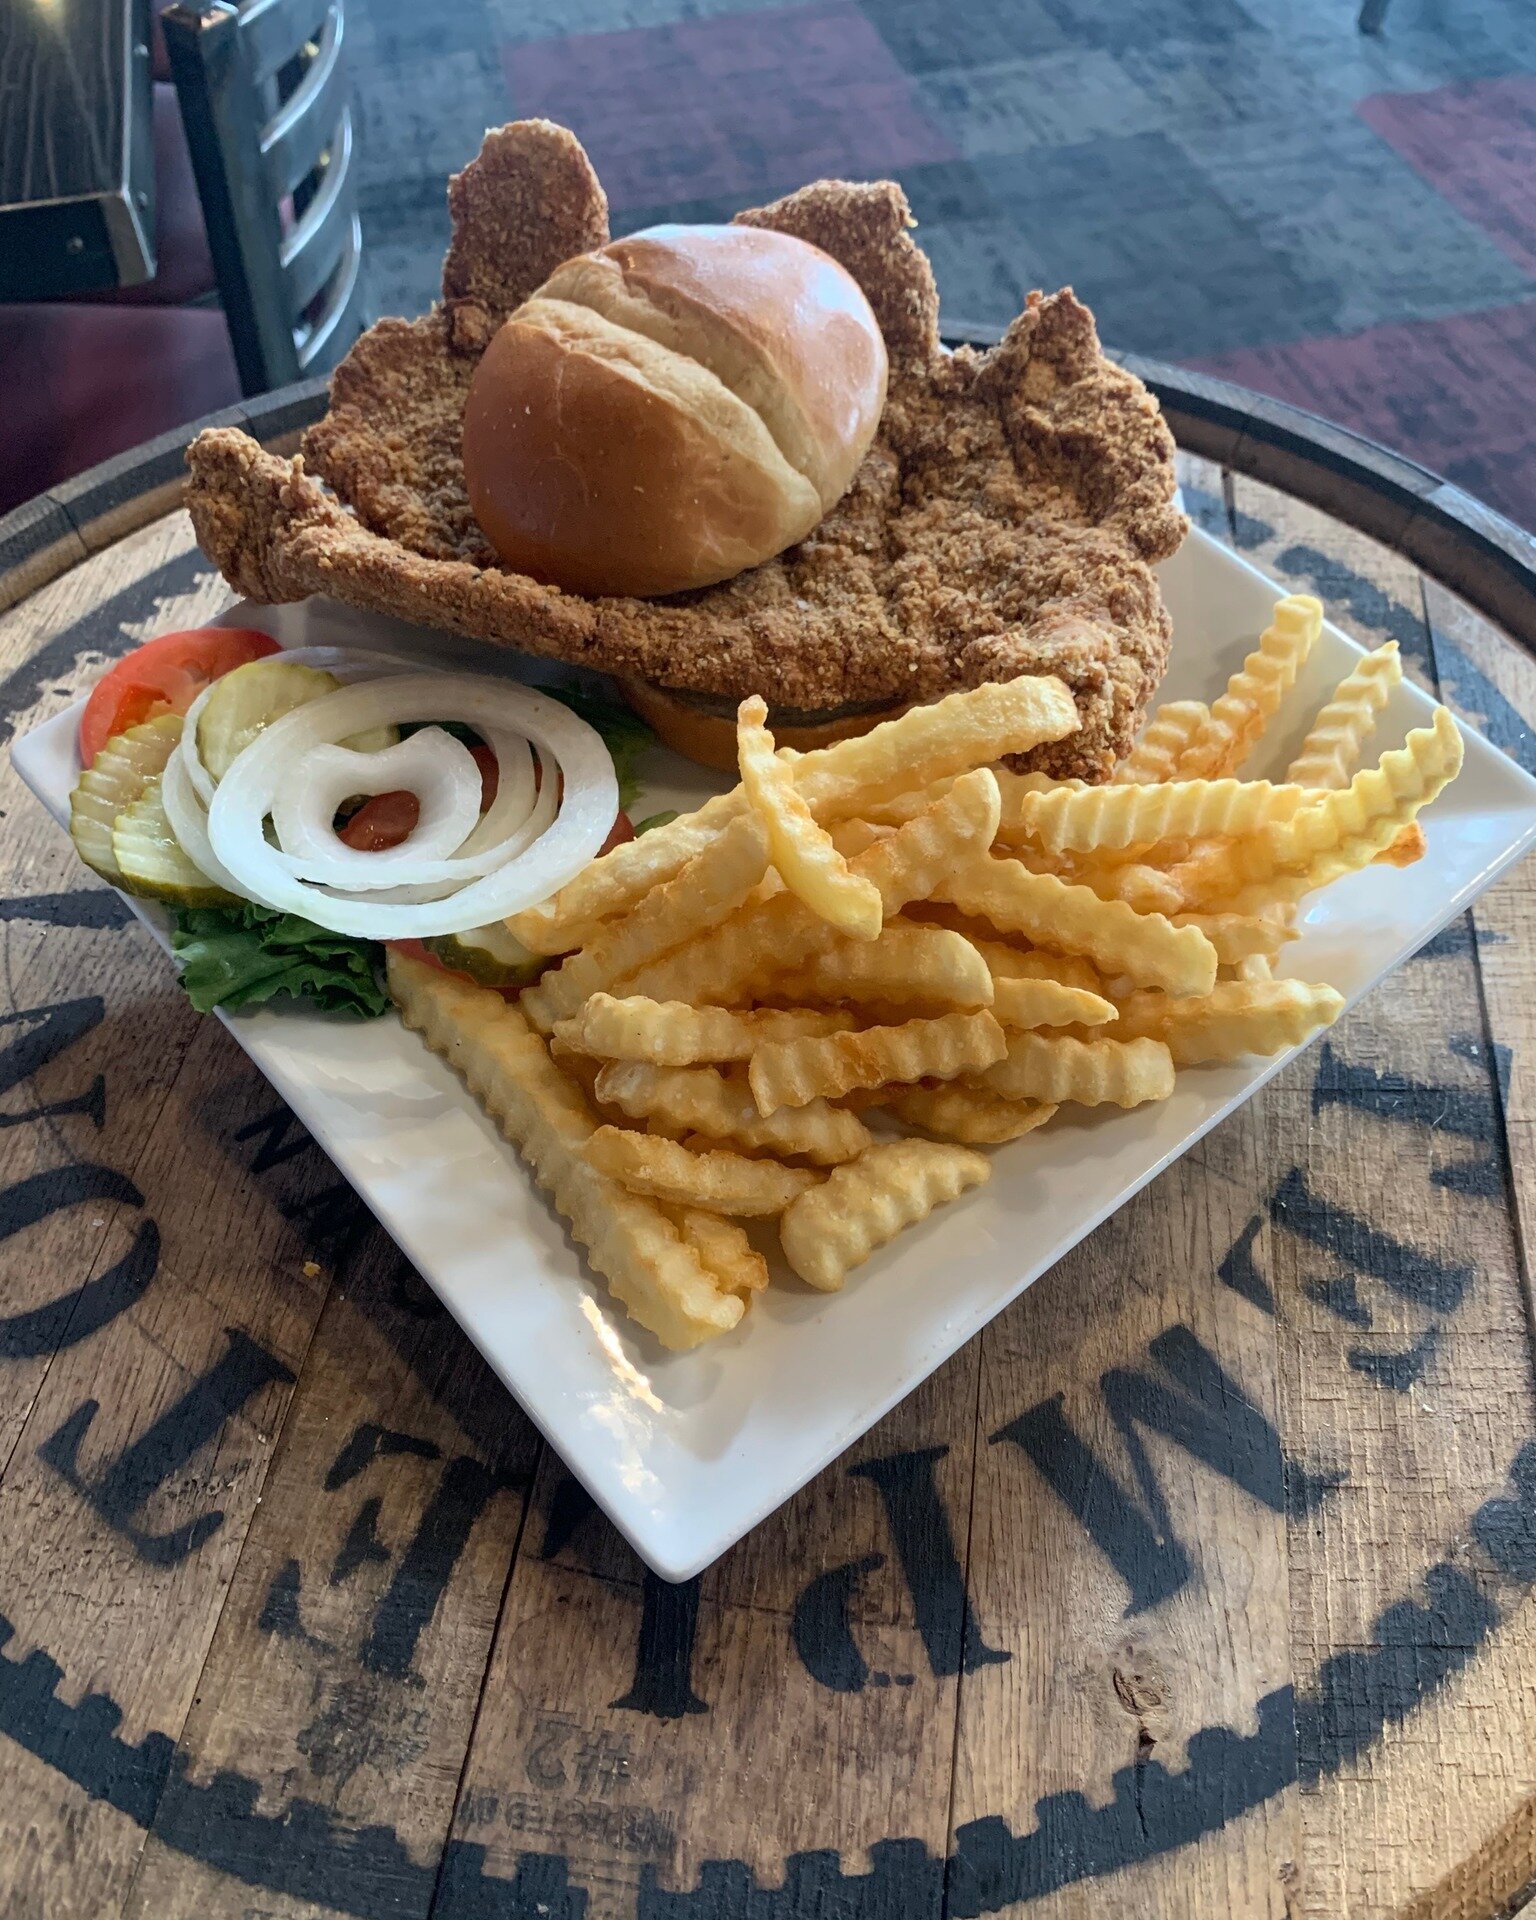 We wouldn't be an authentic Iowa restaurant without the staple tenderloin! Come down this week to featured menu item, our Kingpin Tenderloin!